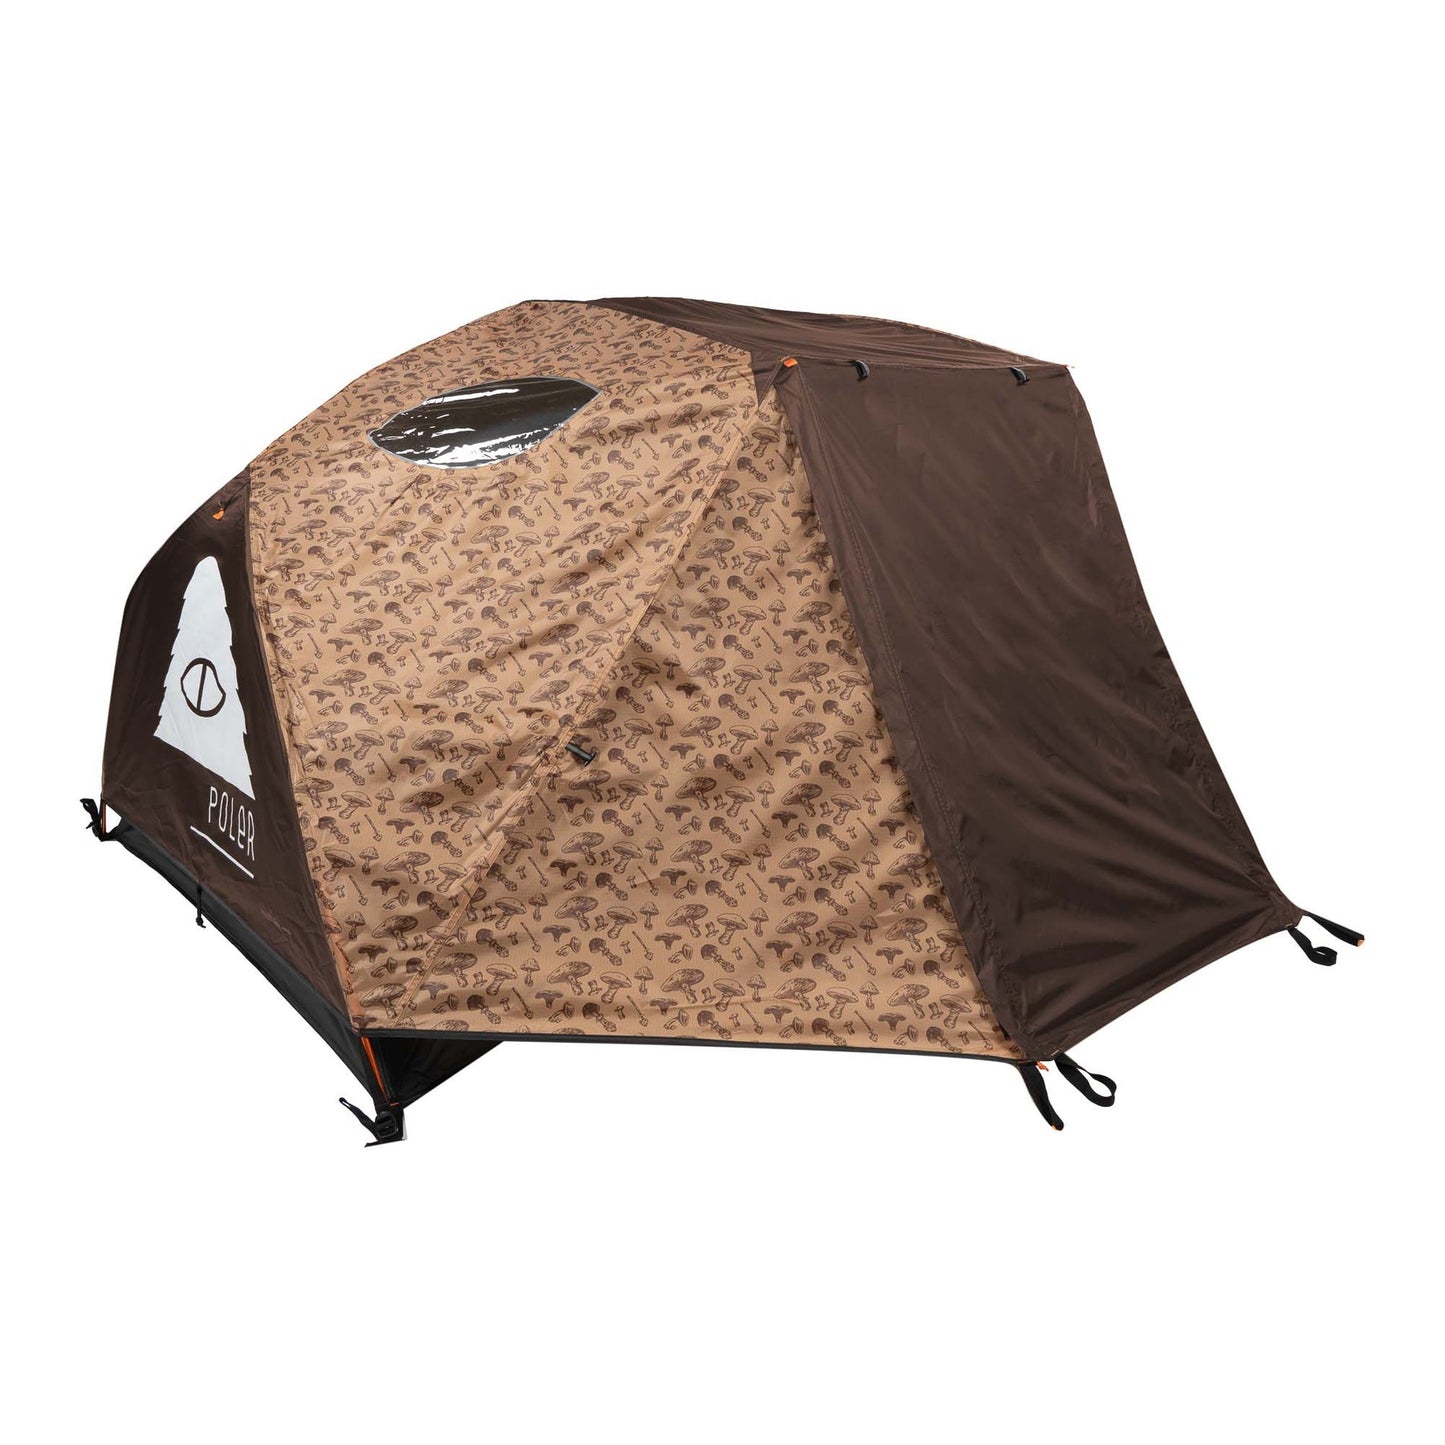 2 Person Tent SP23